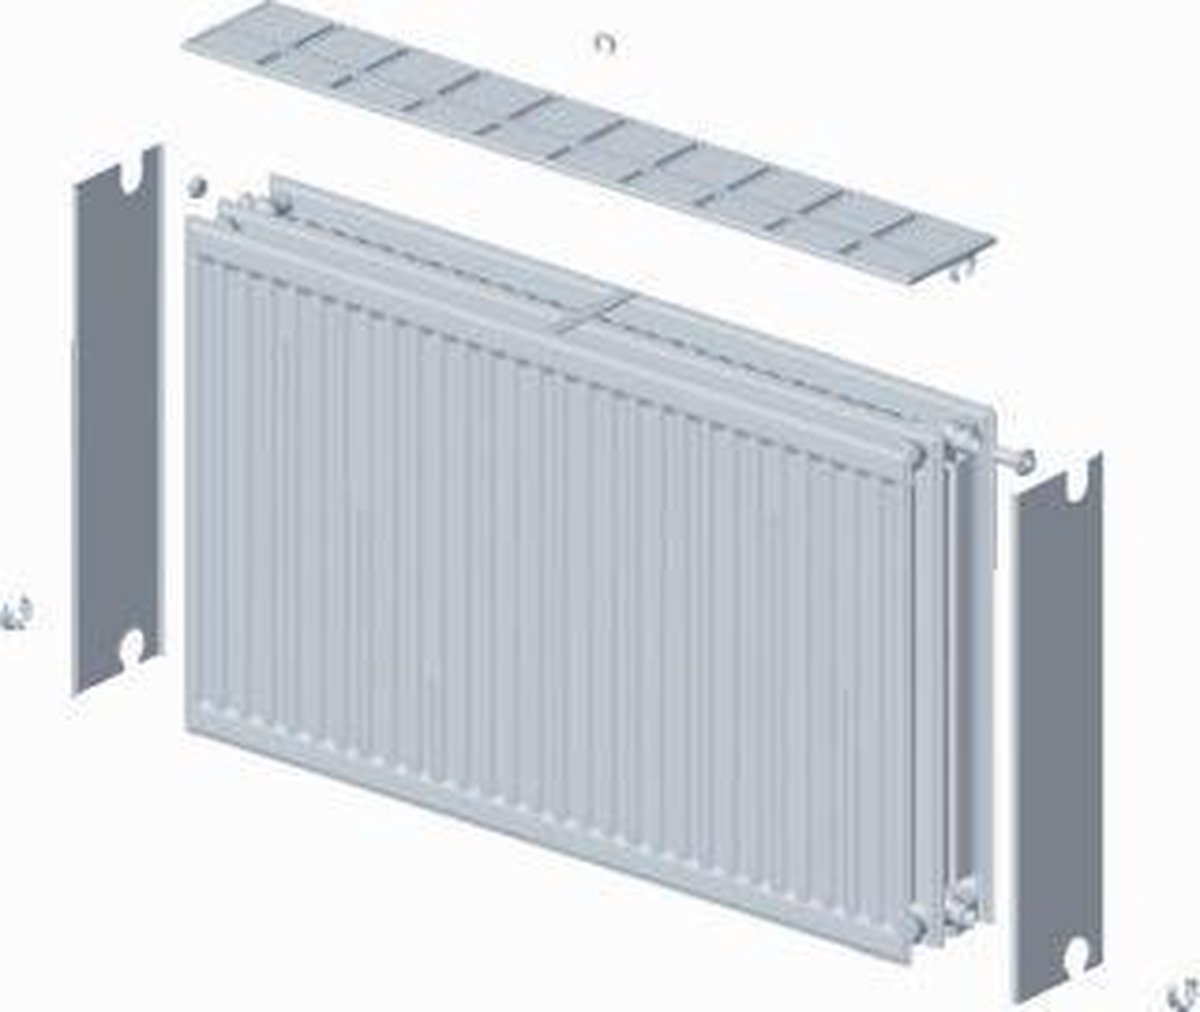 Stelrad paneelradiator Novello, staal, wit, (hxlxd) 900x800x158mm, 33